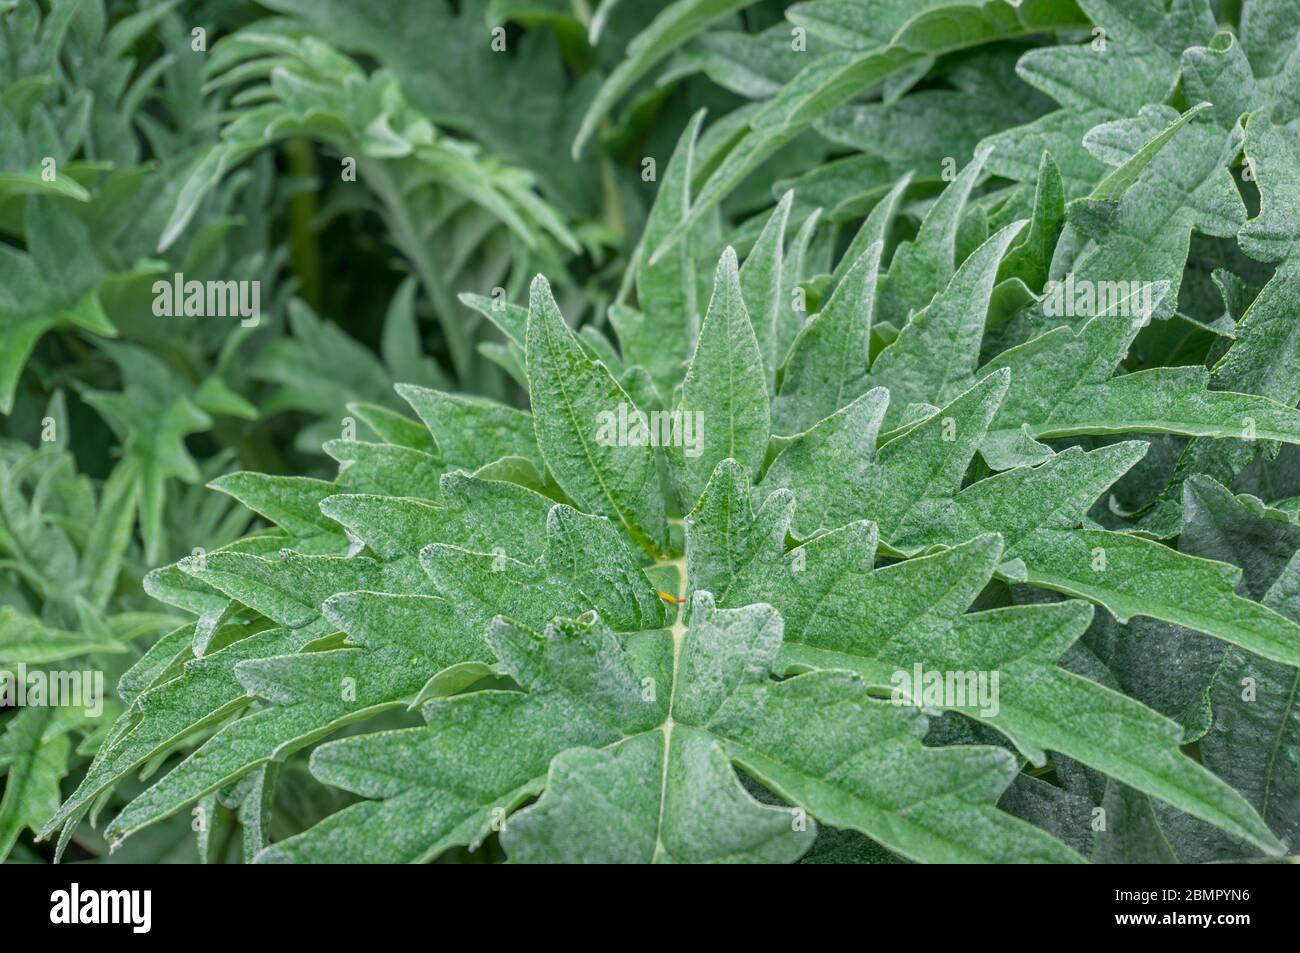 Close up of leaf texture. Nettle family plant close up foliage texture background Stock Photo